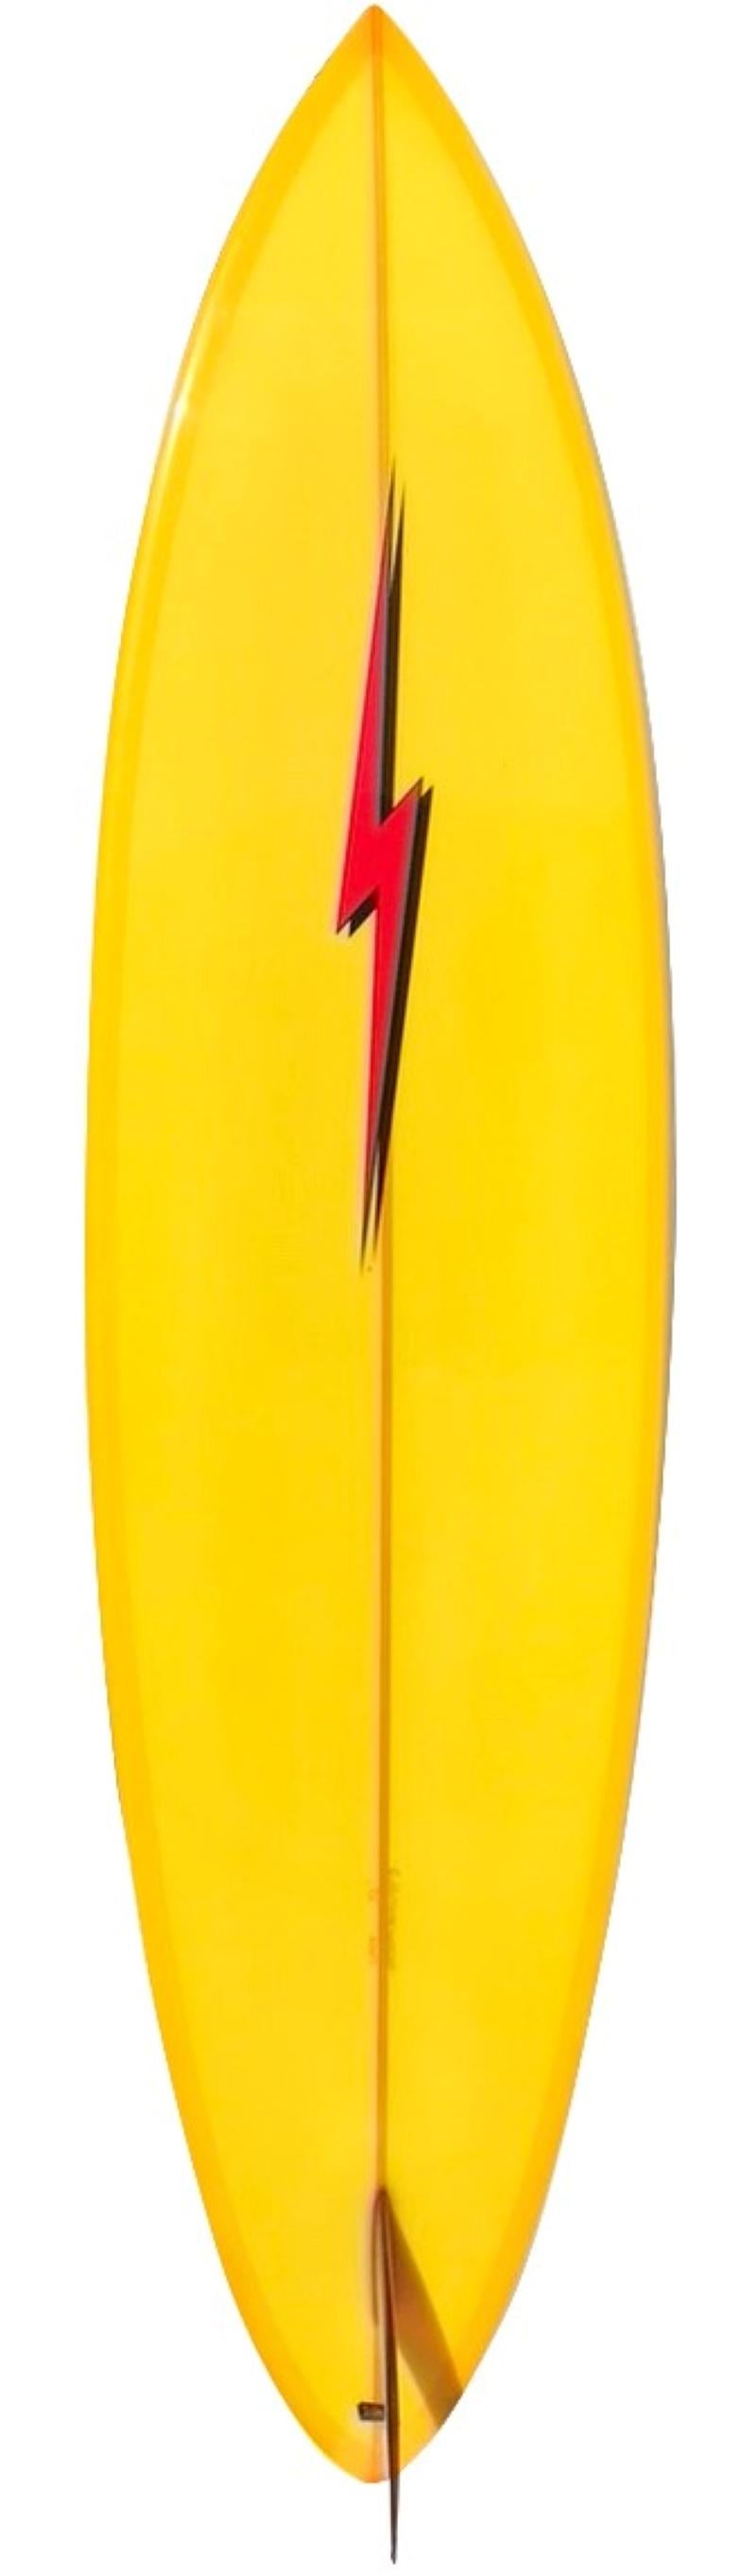 Collectible lightning bolt single fin surfboard shaped by Craig Hollingsworth. Features a rounded pintail shape with double pin line design and glassed on red single fin. A great example of a classic 1970s-style Lightning Bolt shortboard